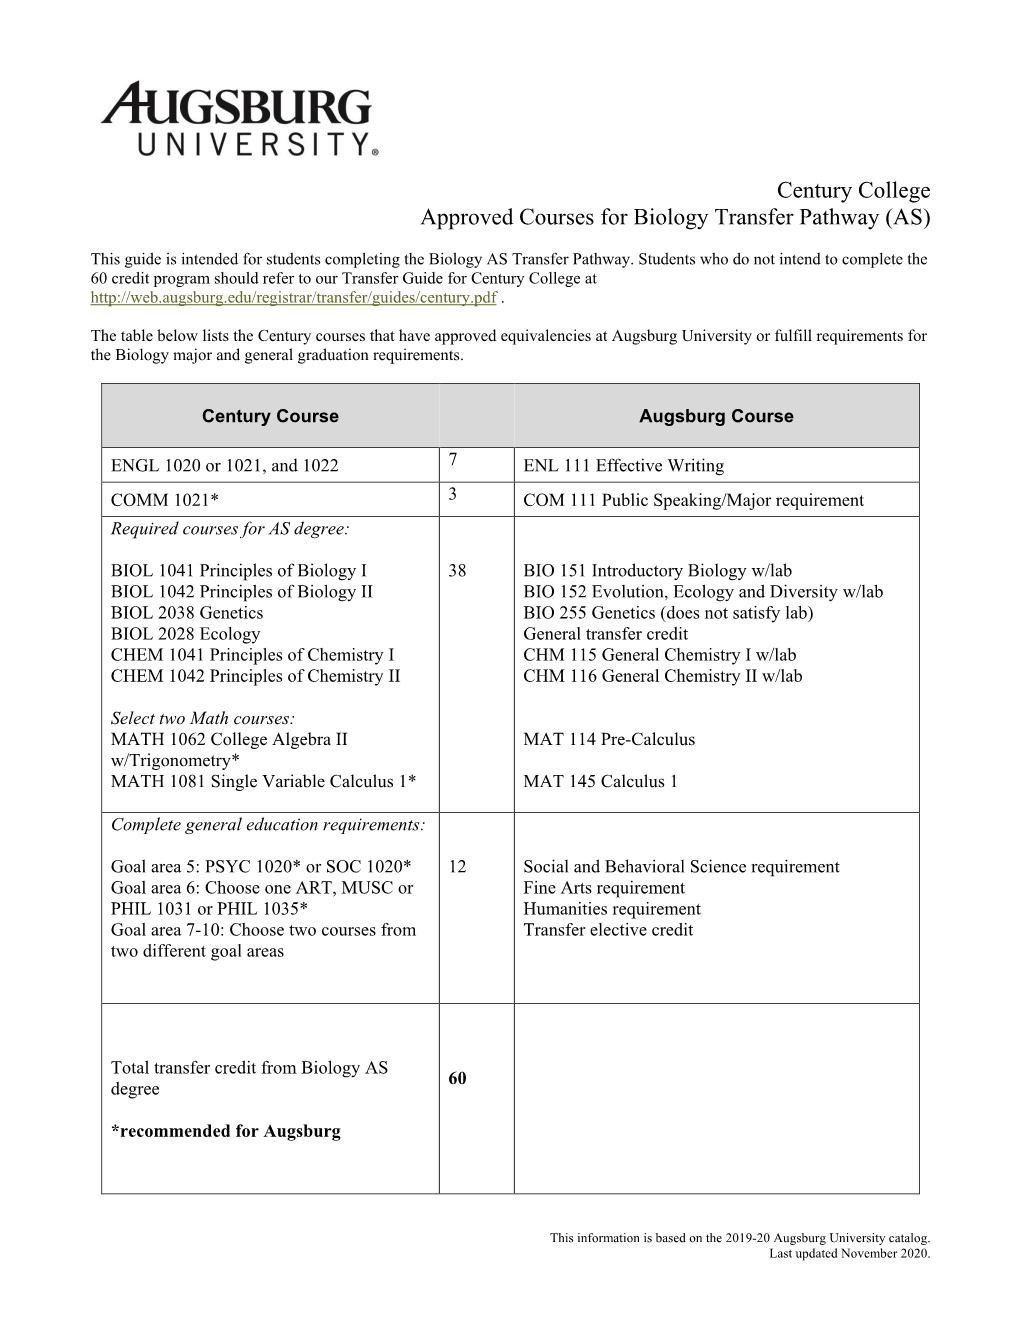 Century College Approved Courses for Biology Transfer Pathway (AS)